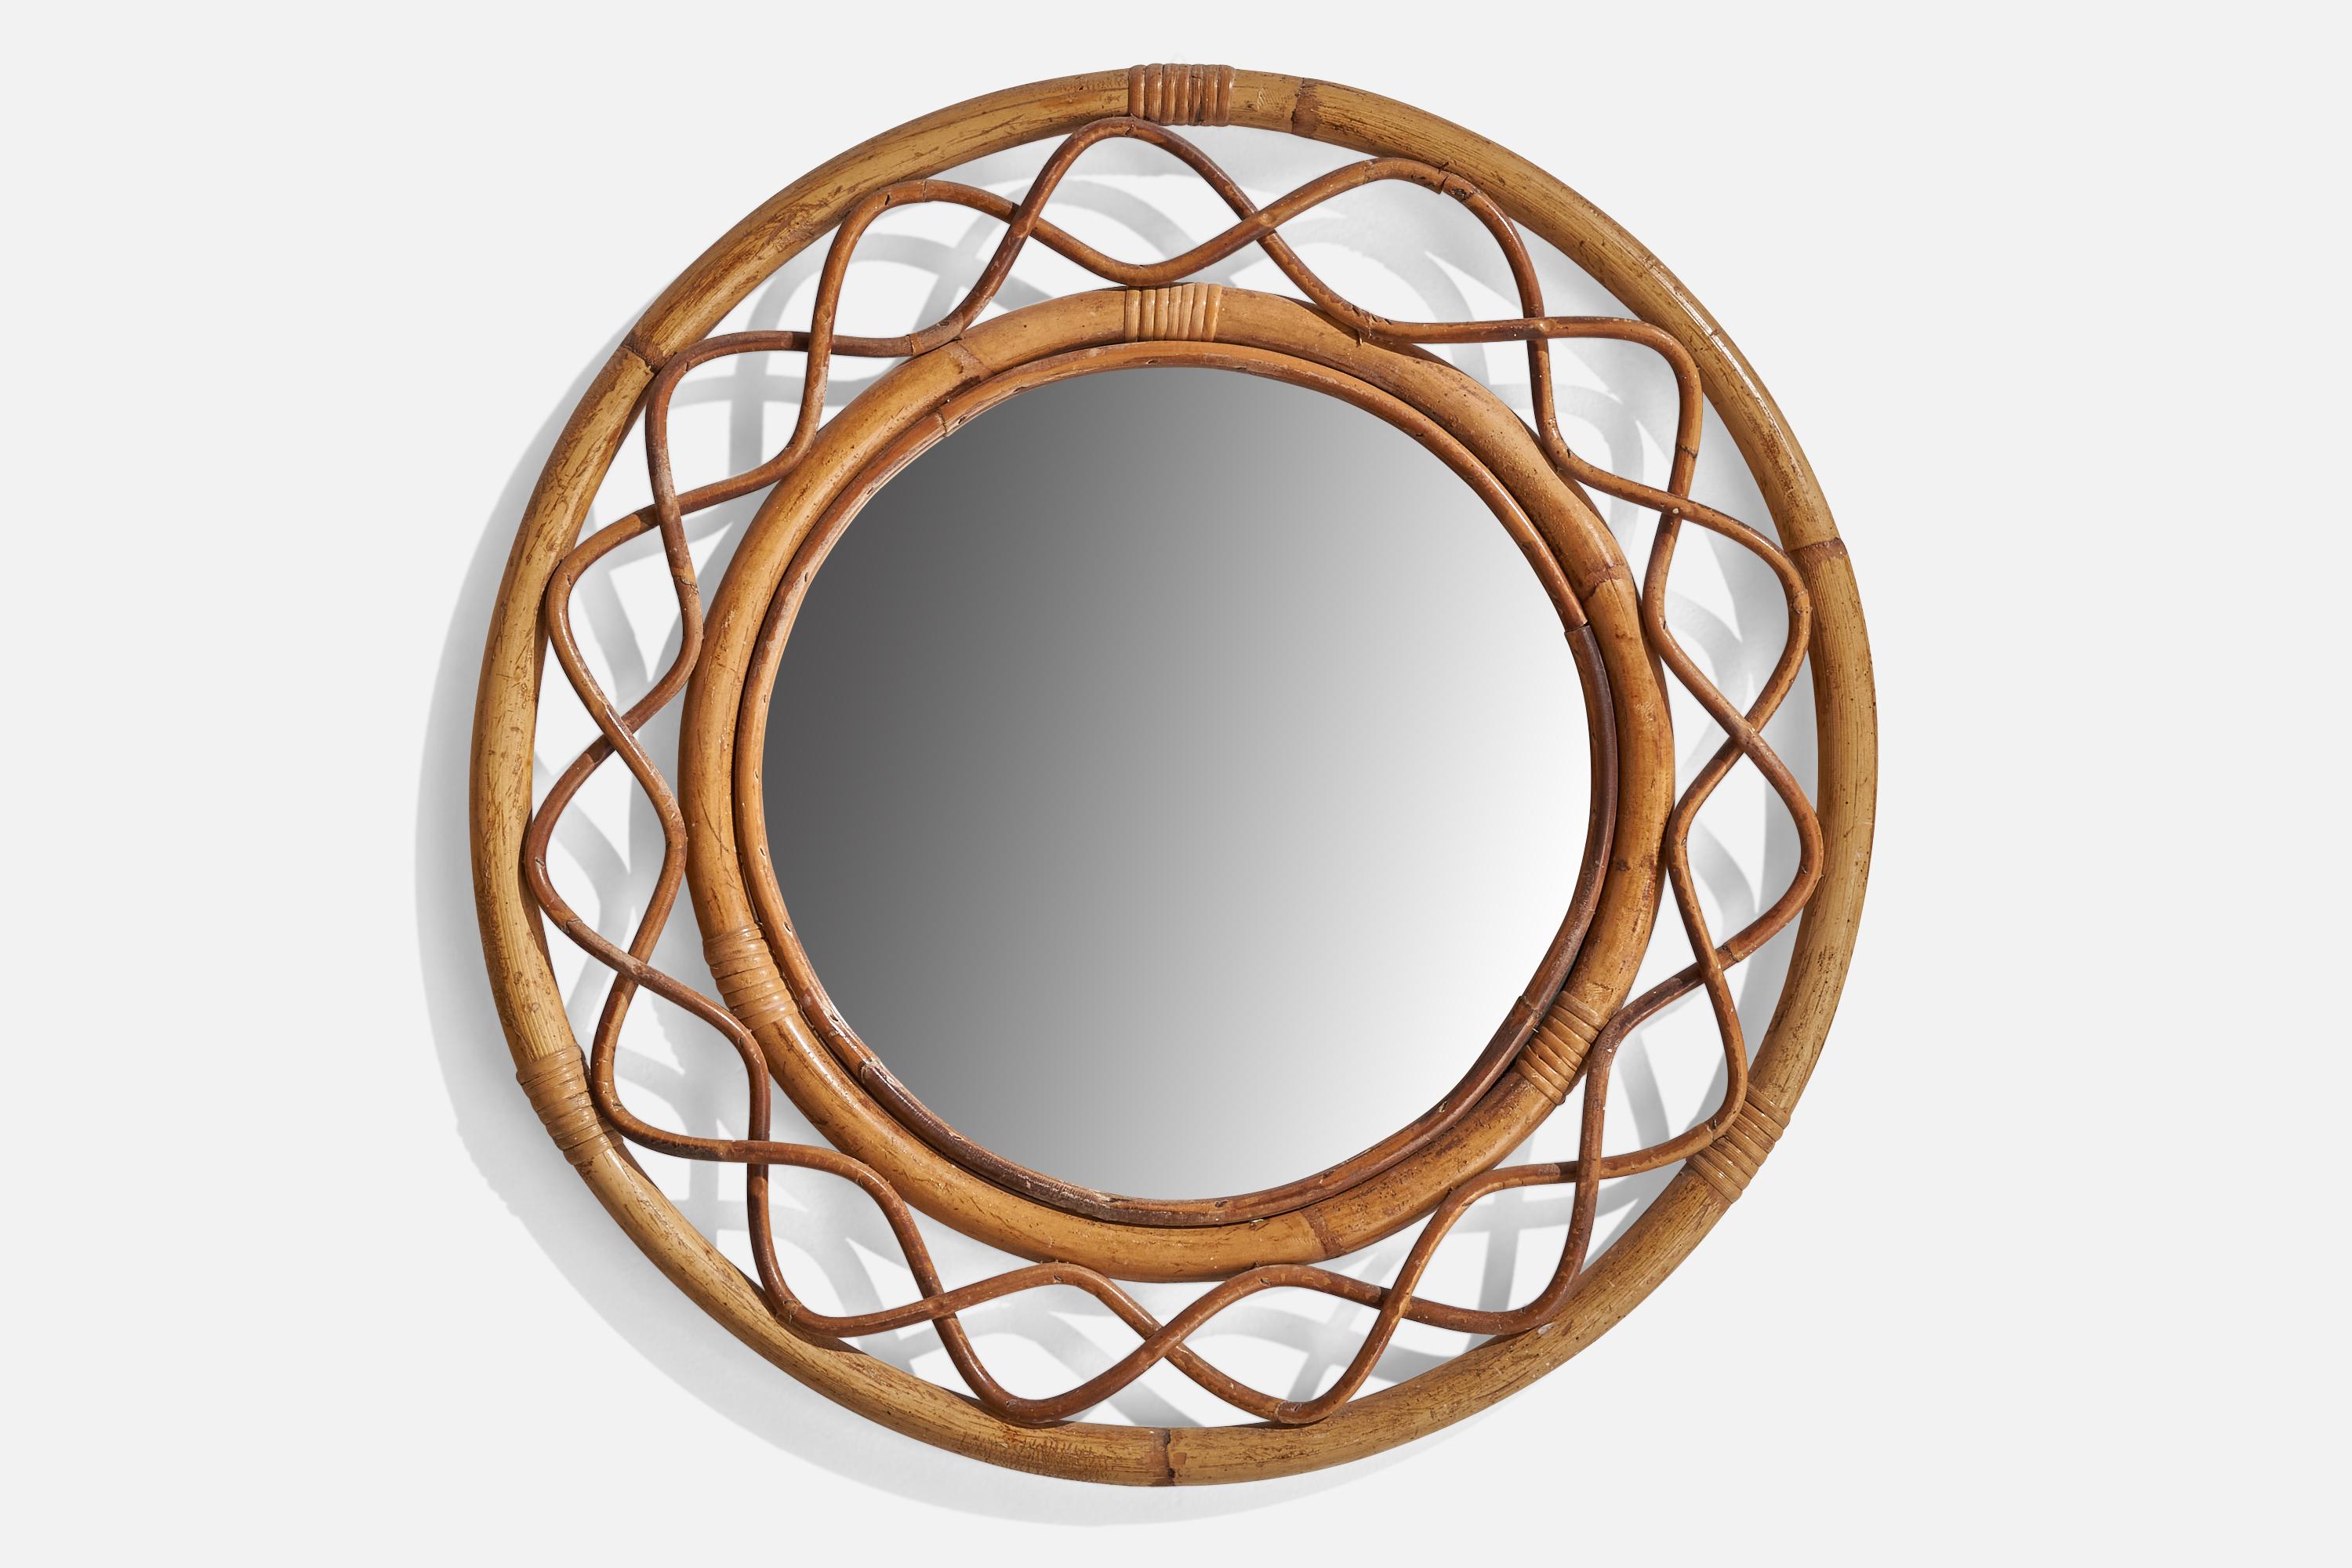 A moulded bamboo and rattan wall mirror designed and produced in Italy, 1960s.